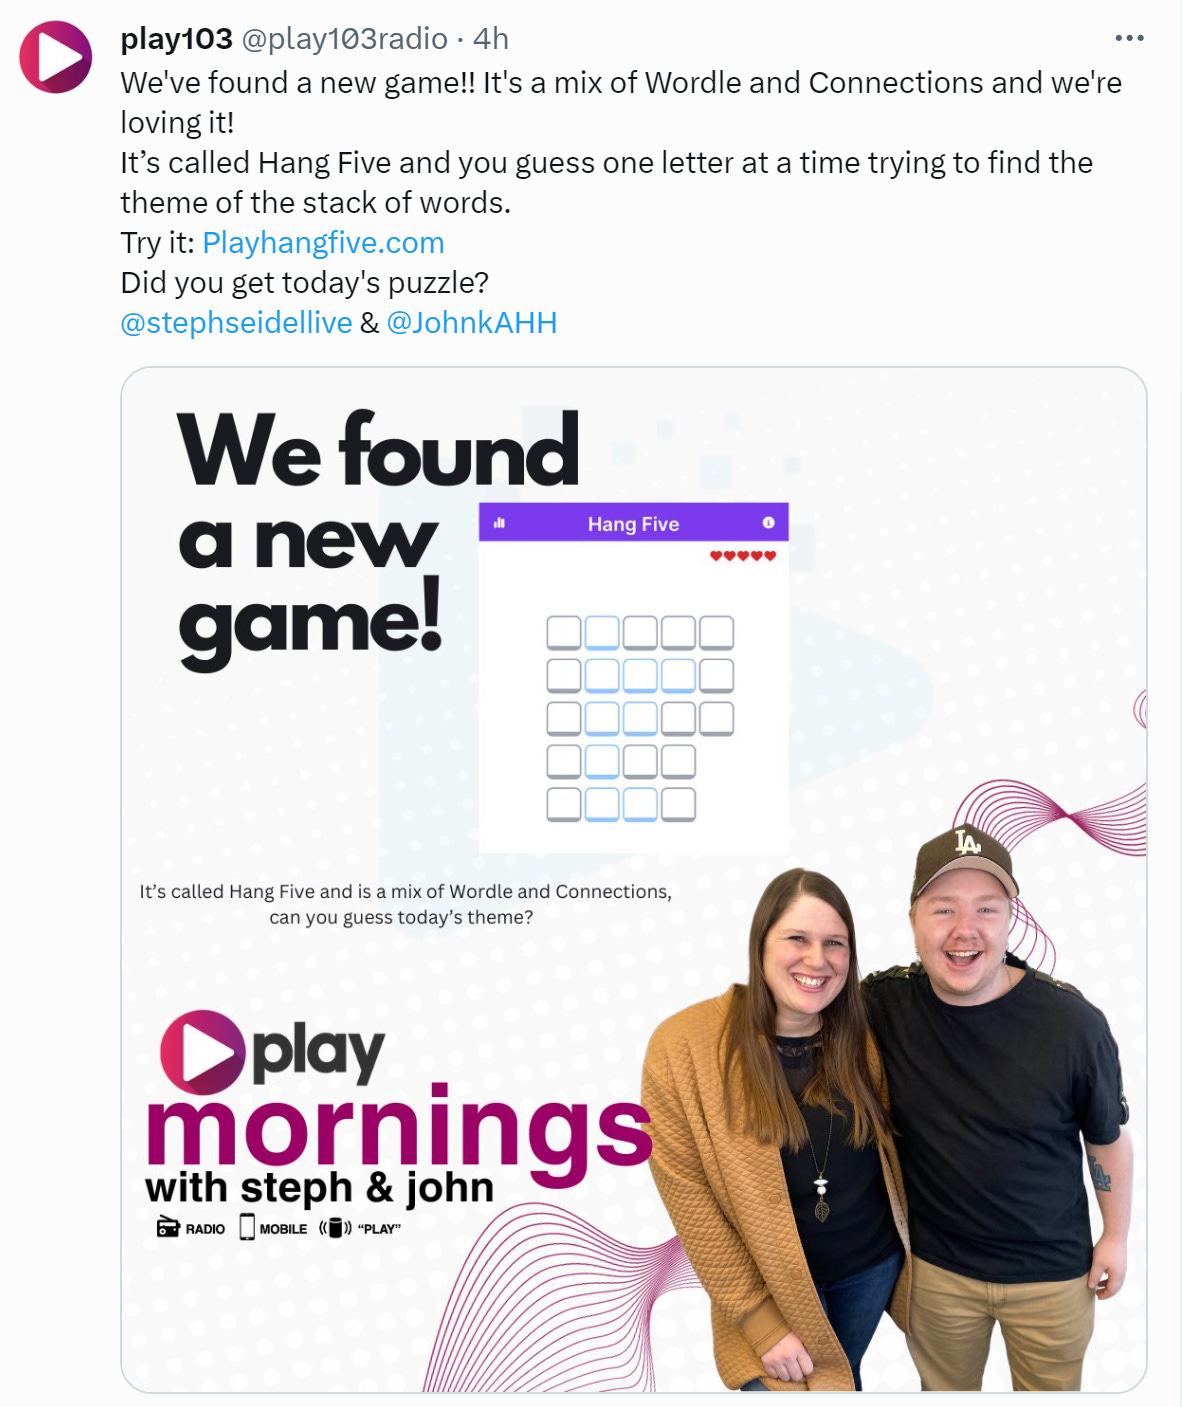 We've found a new game!! It's a mix of Wordle and Connections and we're loving it!  It’s called Hang Five and you guess one letter at a time trying to find the theme of the stack of words.  Try it: http://Playhangfive.com  Did you get today's puzzle? @stephseidellive  &  @JohnkAHH